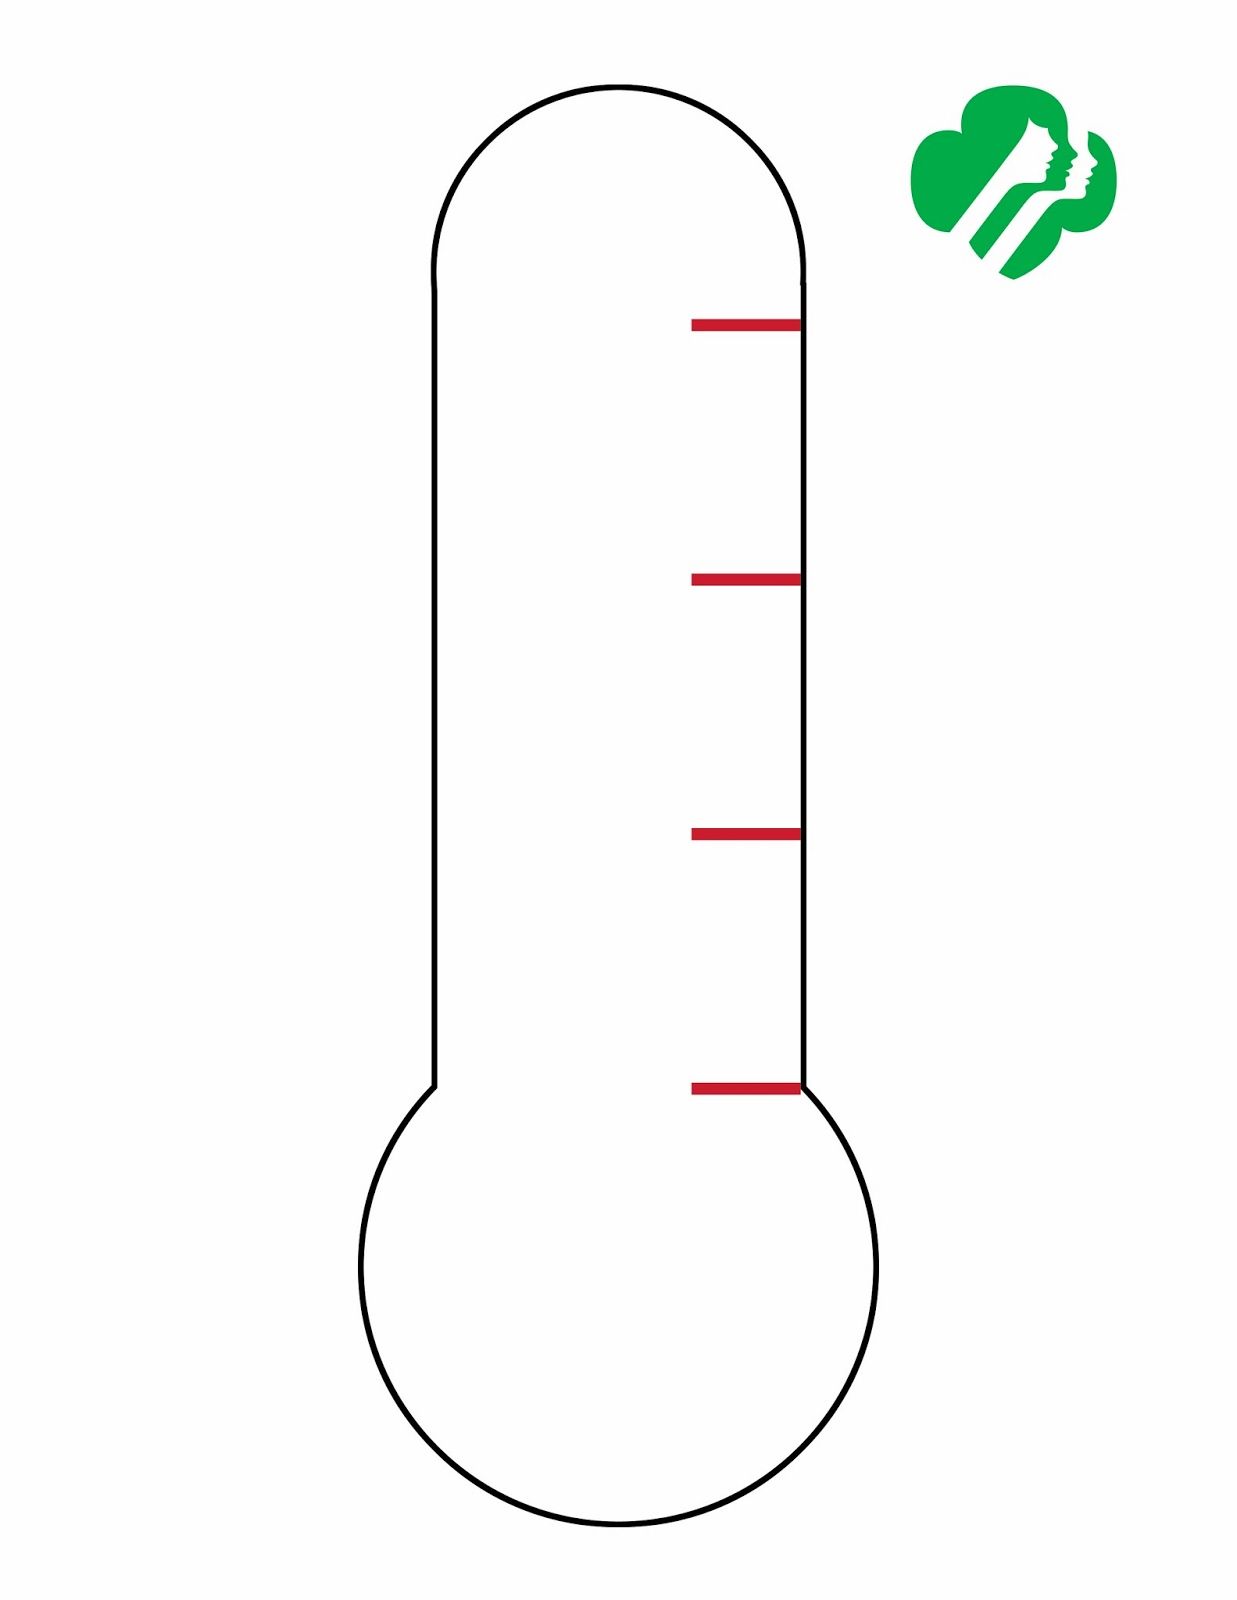 Leader clipart goal. Thermometer template free clip